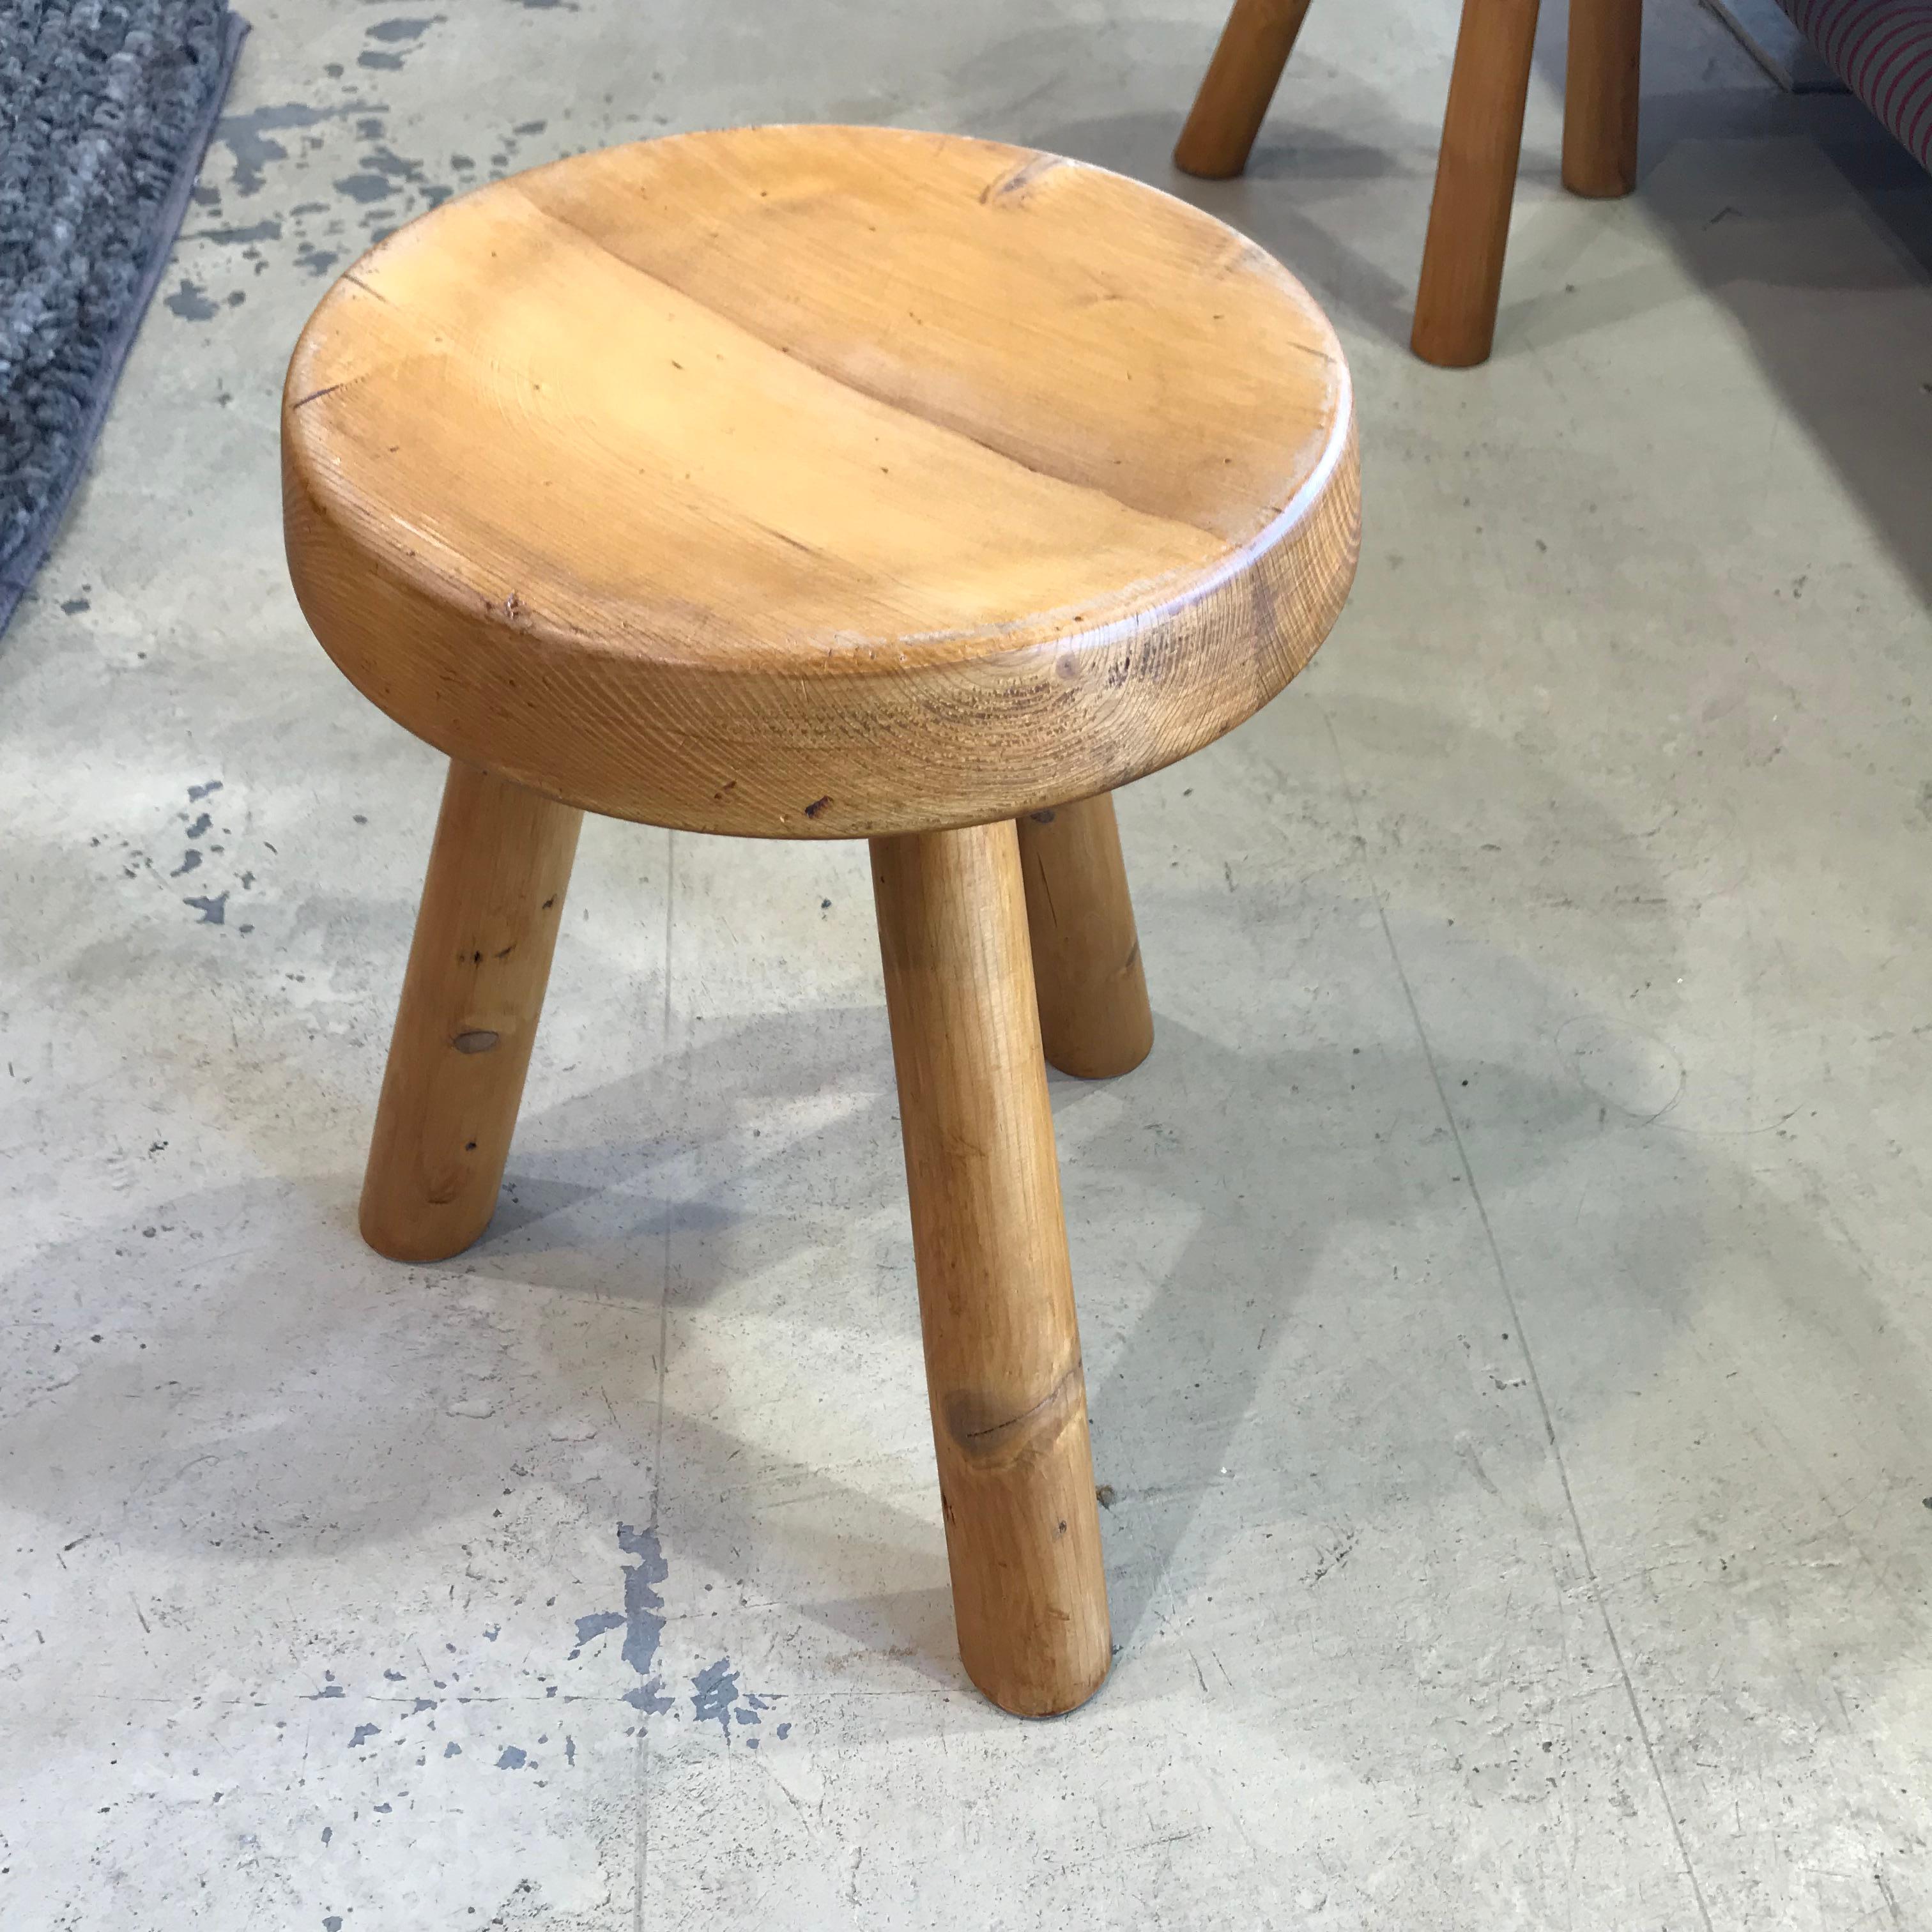 Charlotte Perriand's Stools 